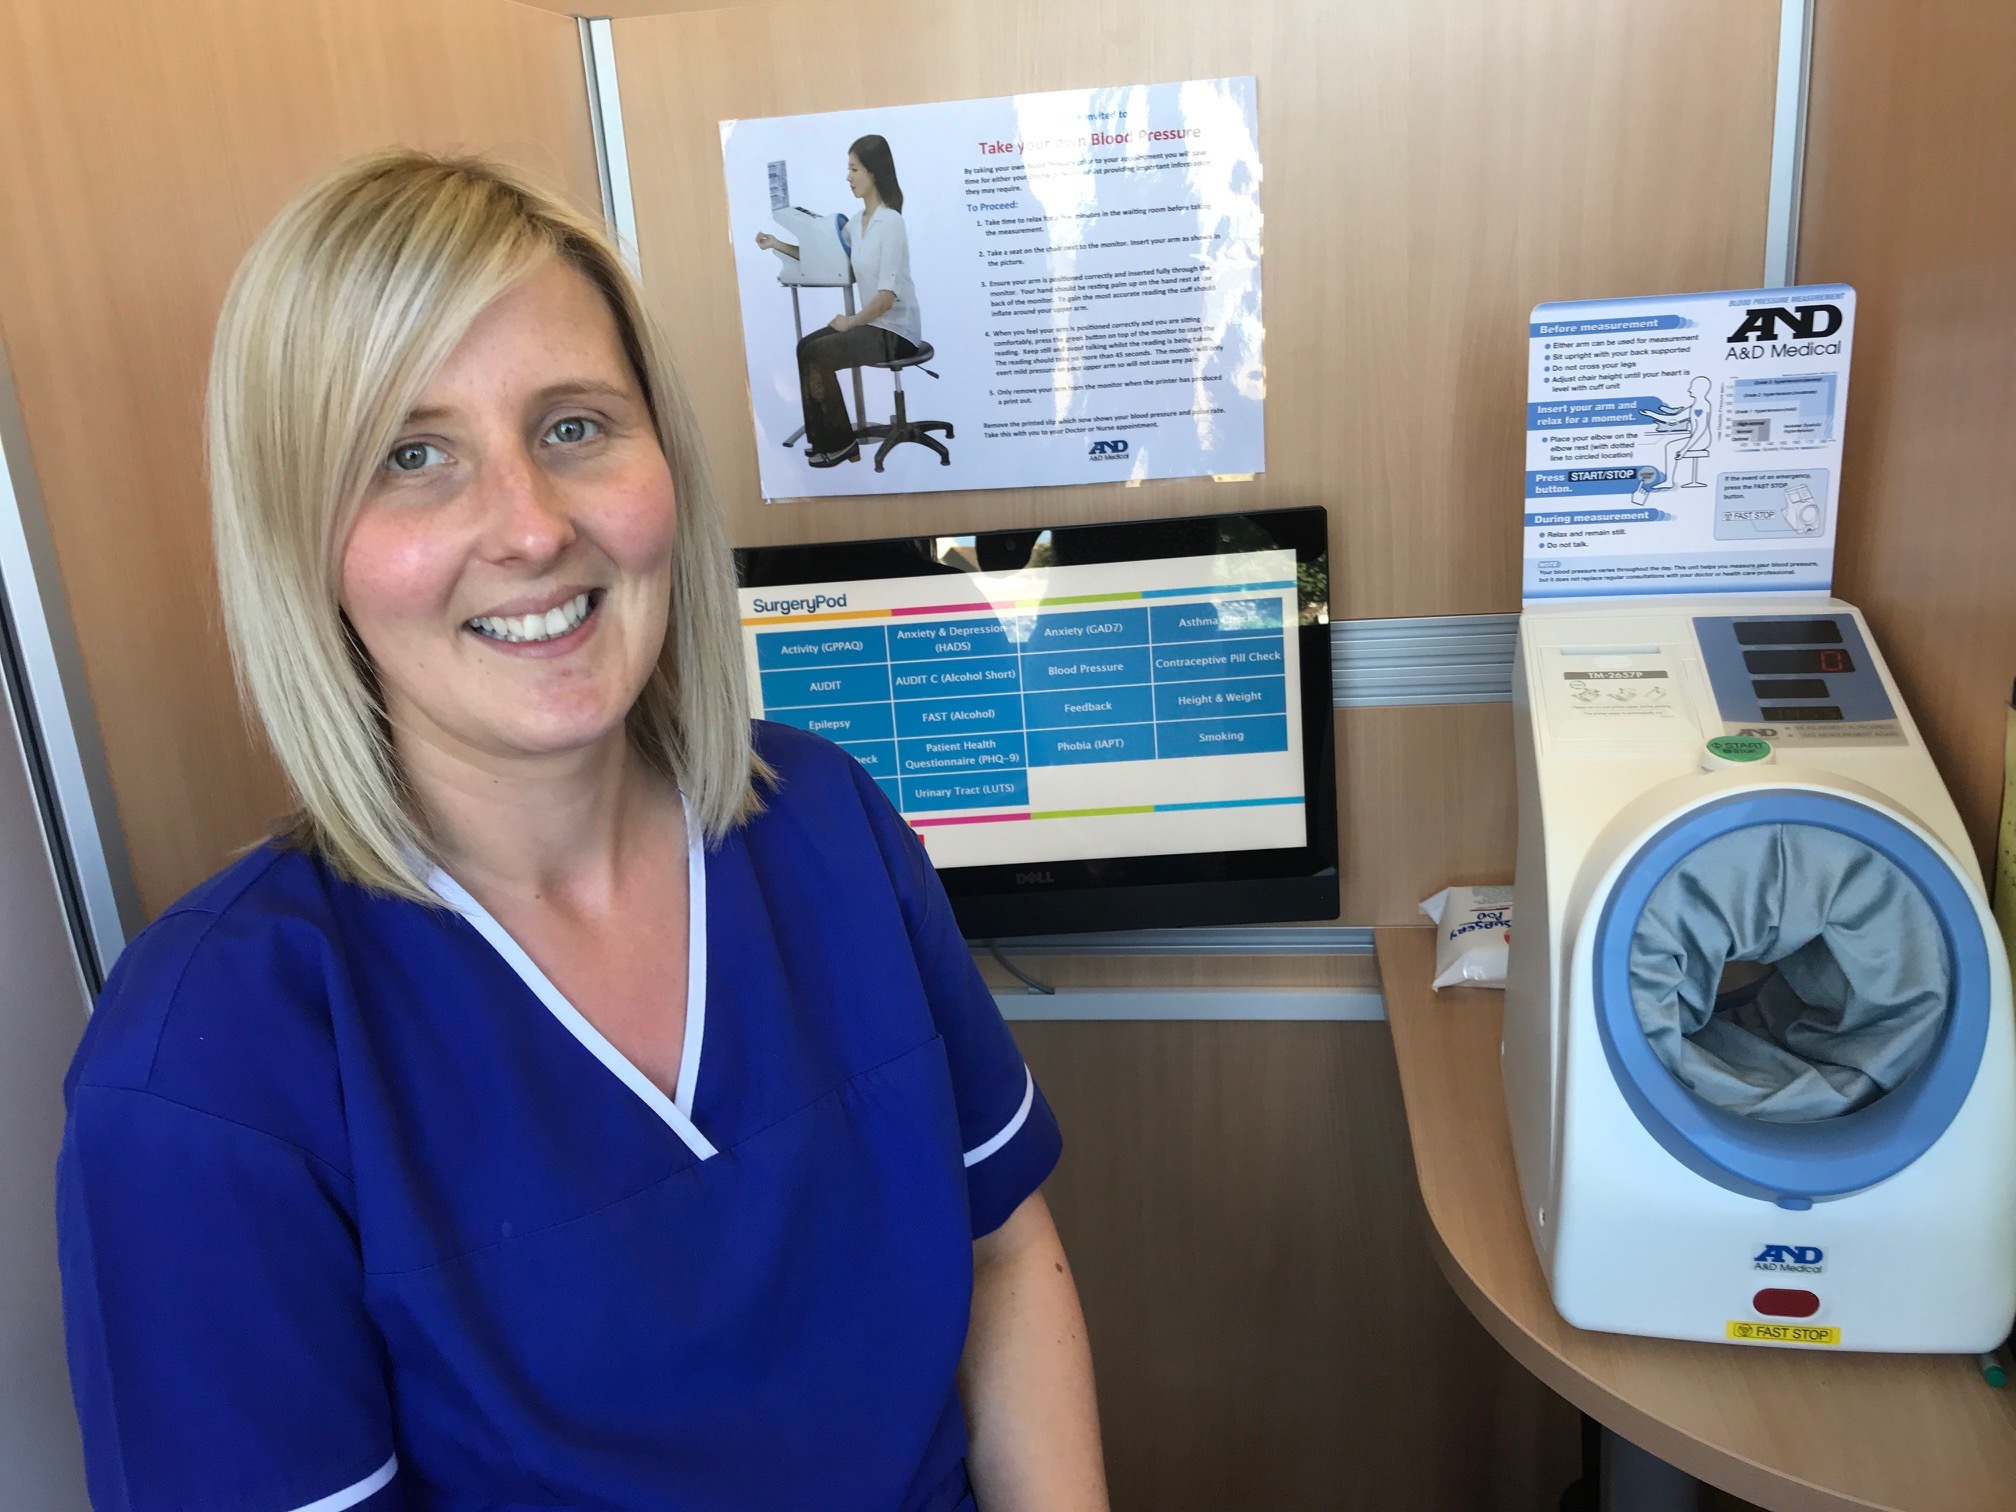 Macduff Medical Practice has introduced a surgery pod to their waiting area.